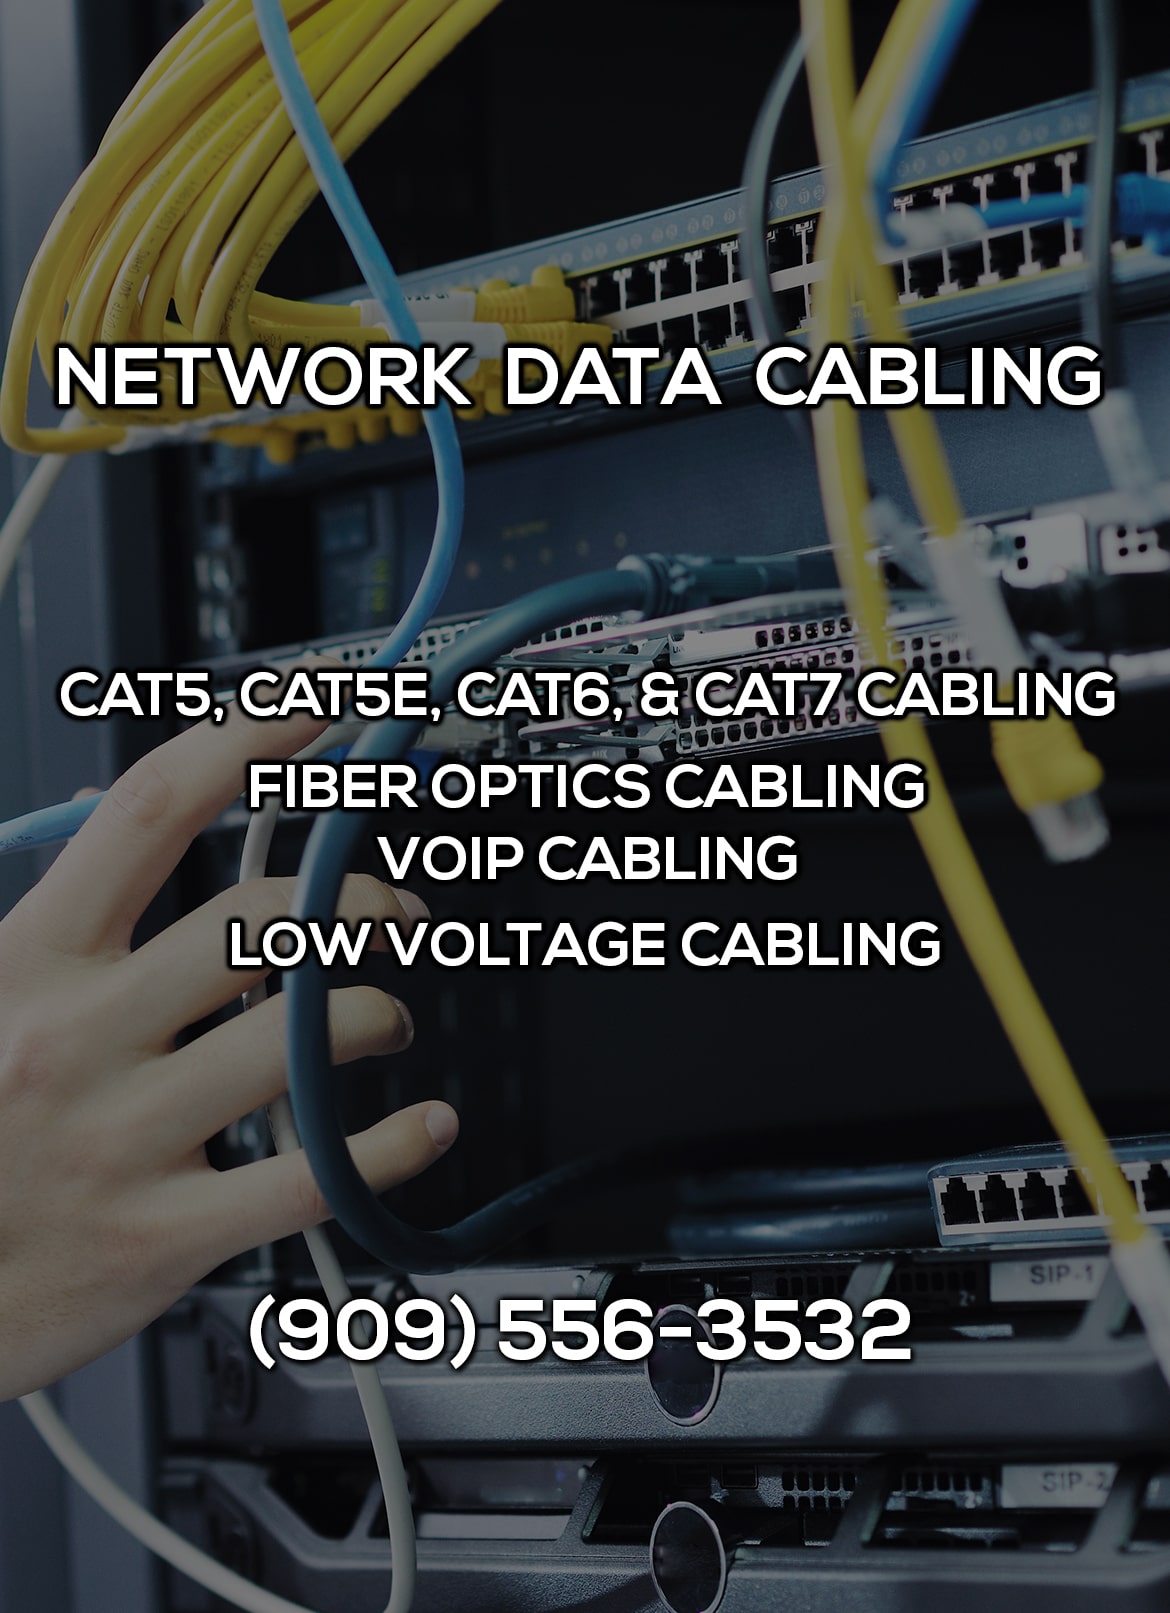 Network Data Cabling in Needles CA